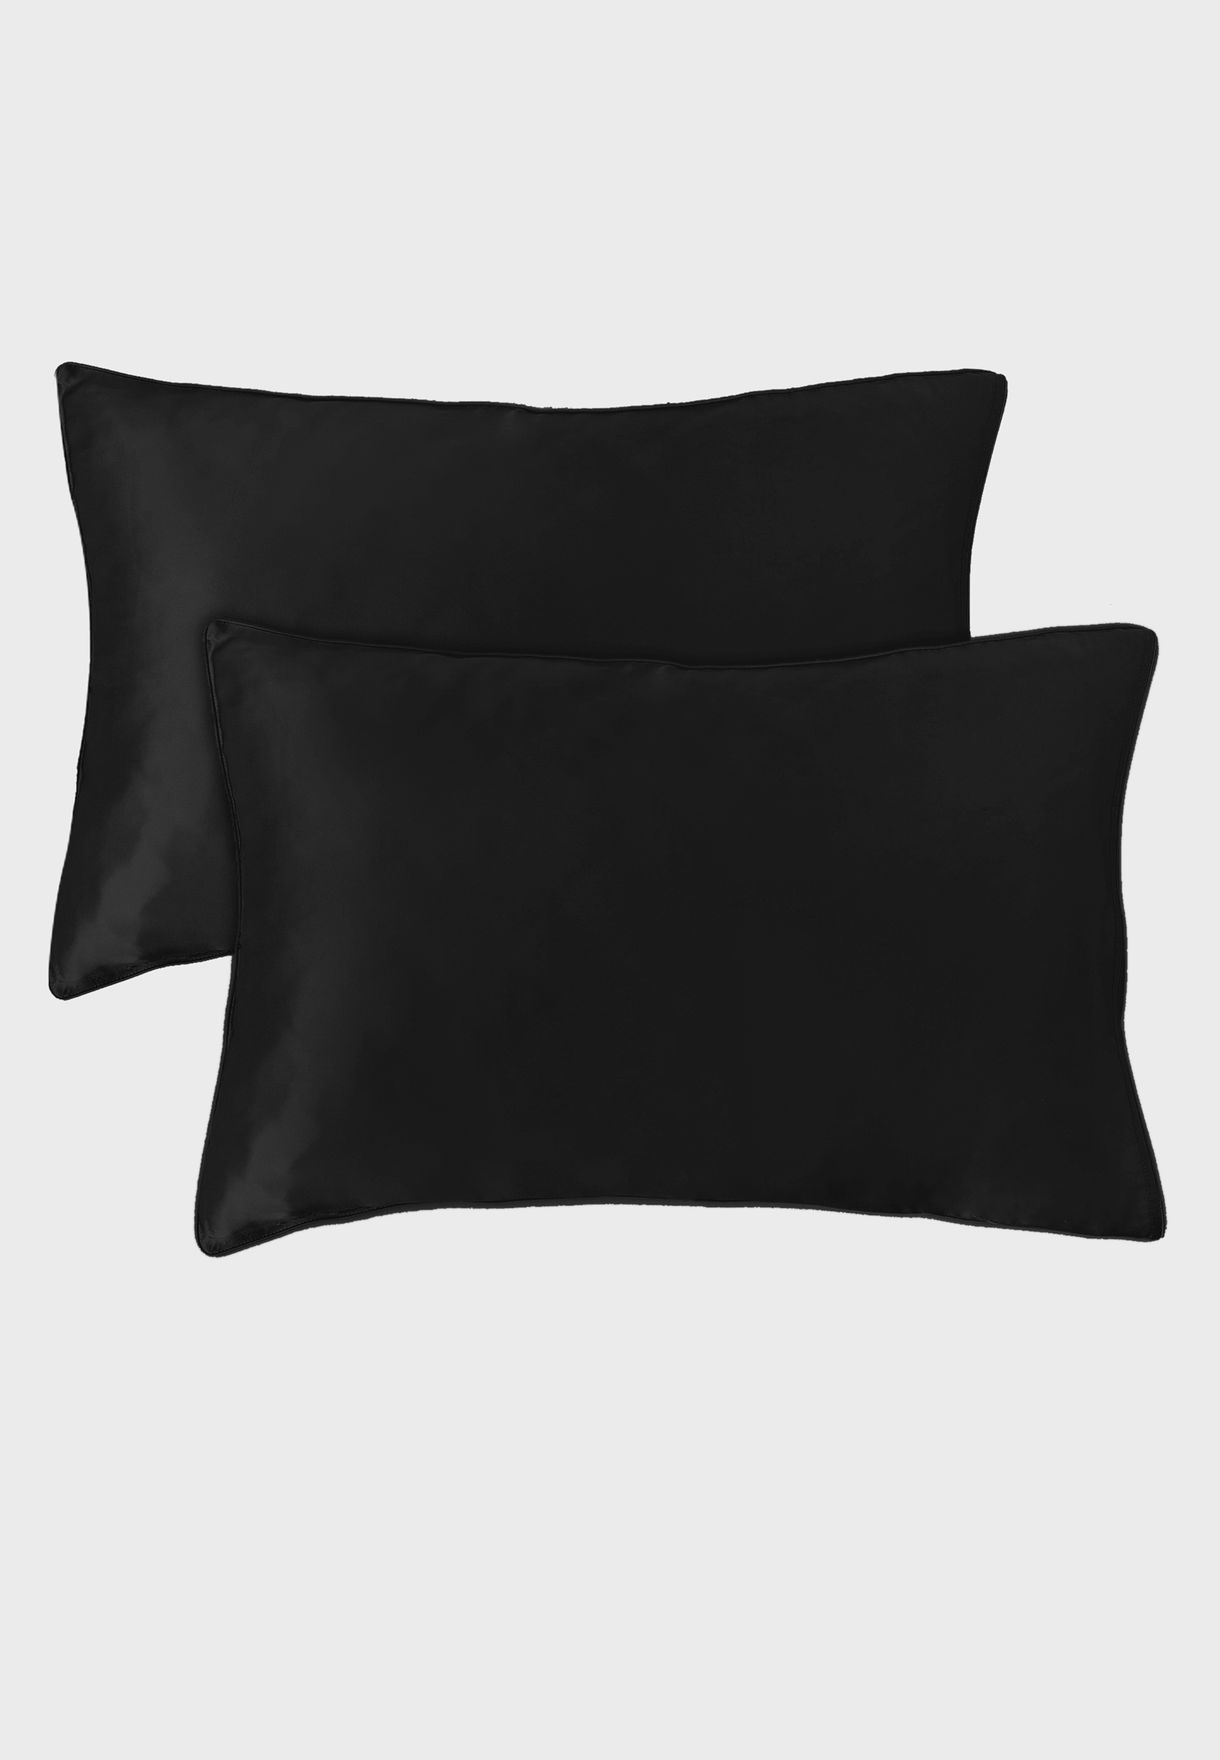 Queen Size Pillowcases - Black 20 X 30 Inches